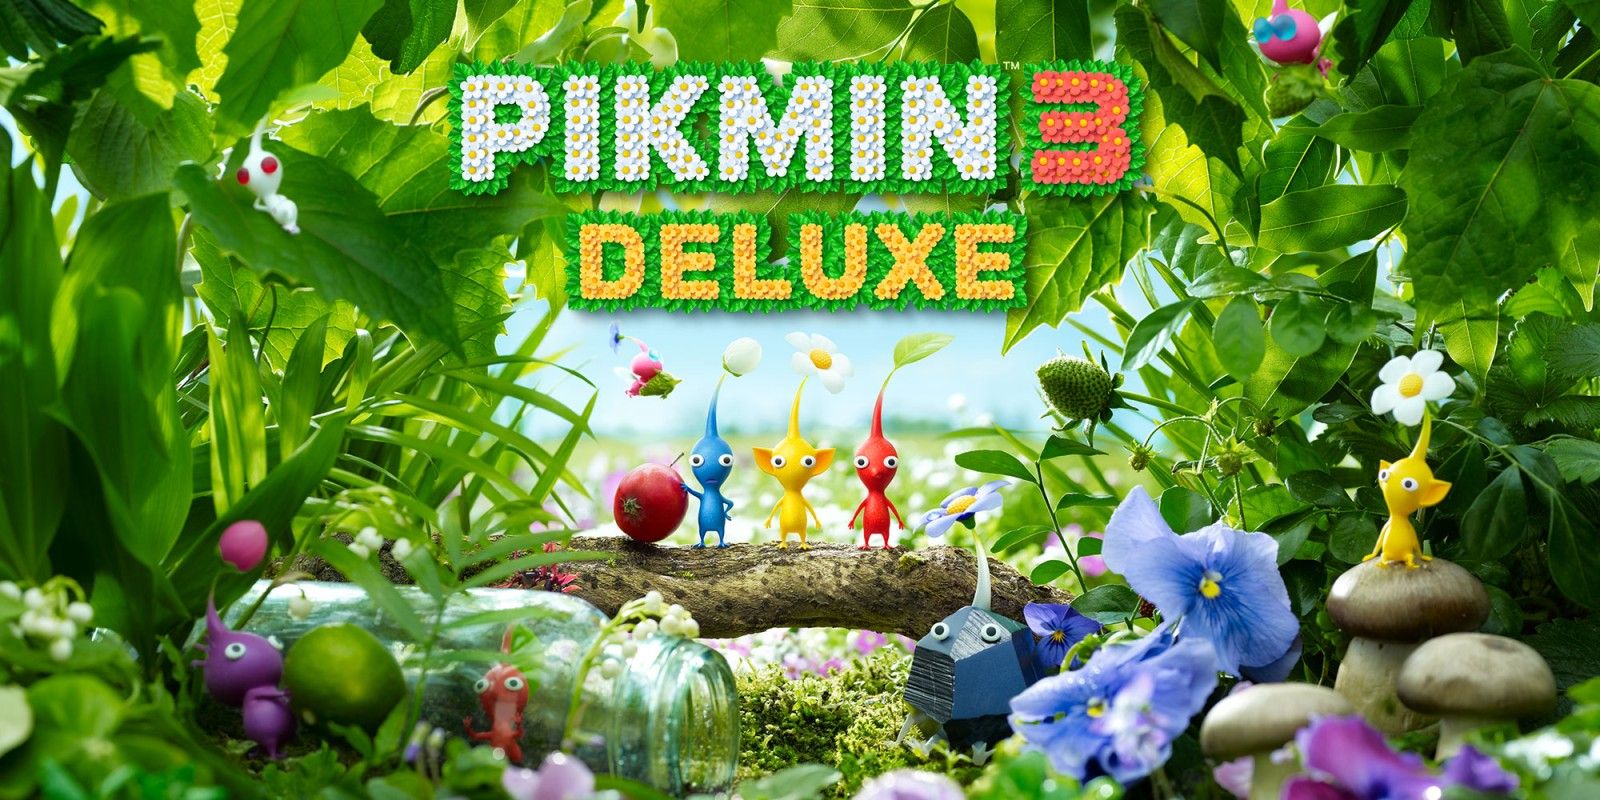 Pikmin 3 Deluxe is now the best selling Pikmin game